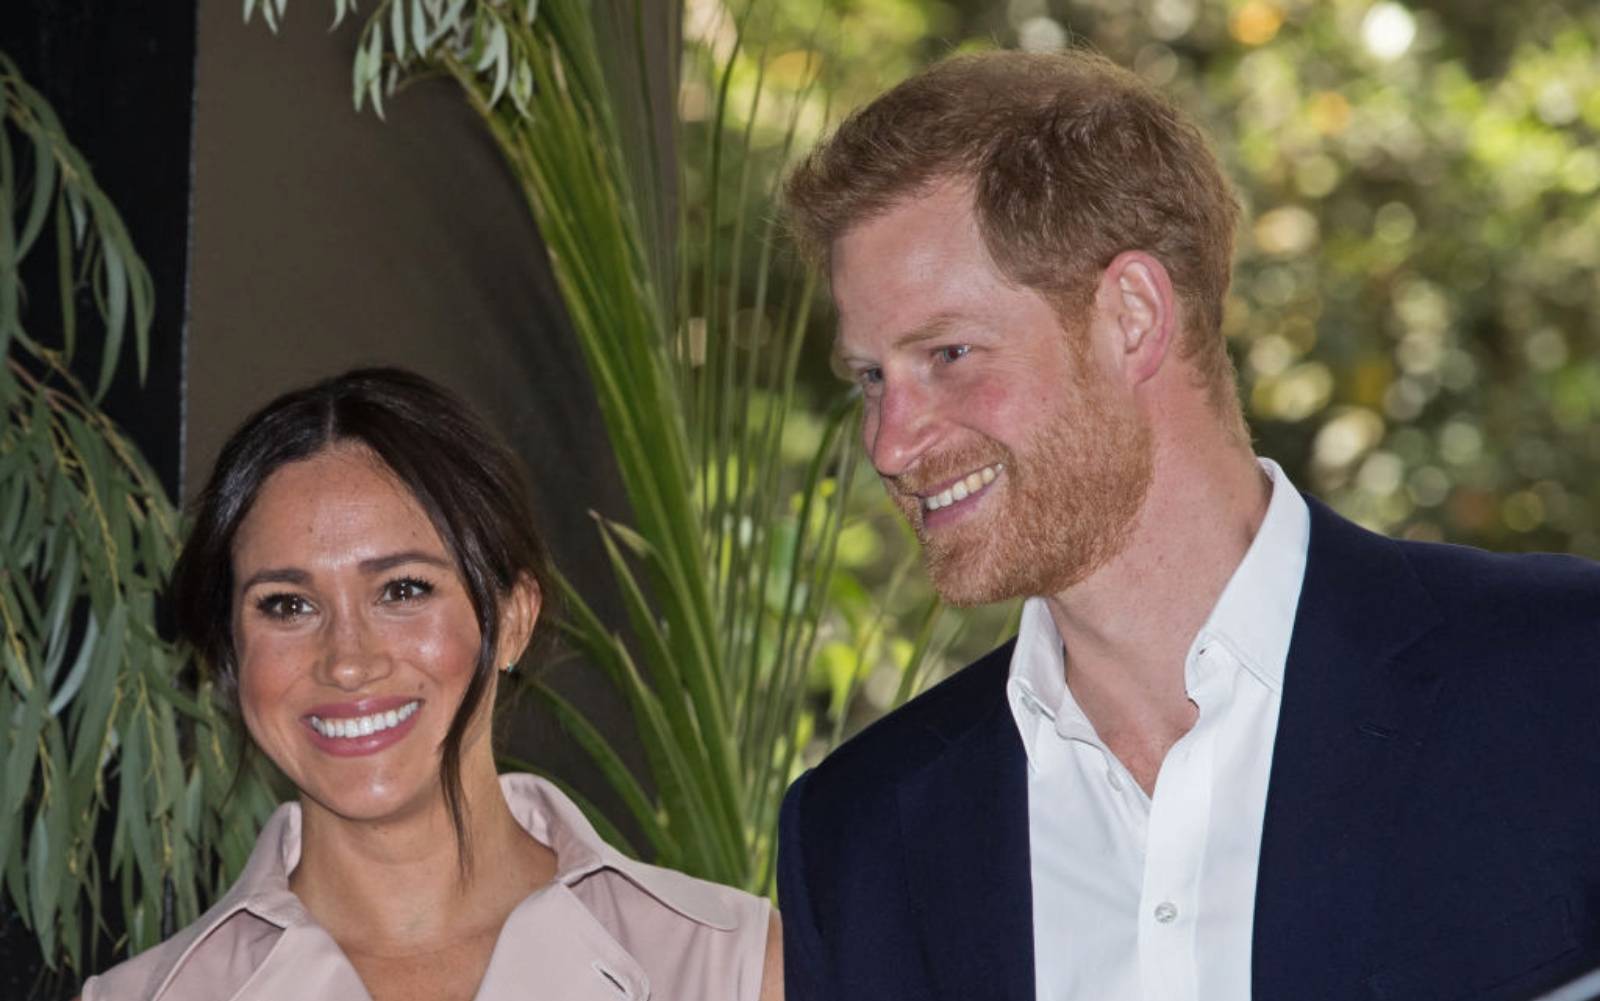 Image licensed to i-Images Picture Agency. 02/10/2019. Johannesburg, South Africa. Prince Harry and Meghan Markle, the Duke and Duchess of Sussex, at a business reception at the British High Commissioner’s Residence in  Johannesburg, South Africa, on the final day of their Royal Tour.  Picture by Stephen Lock / i-Images